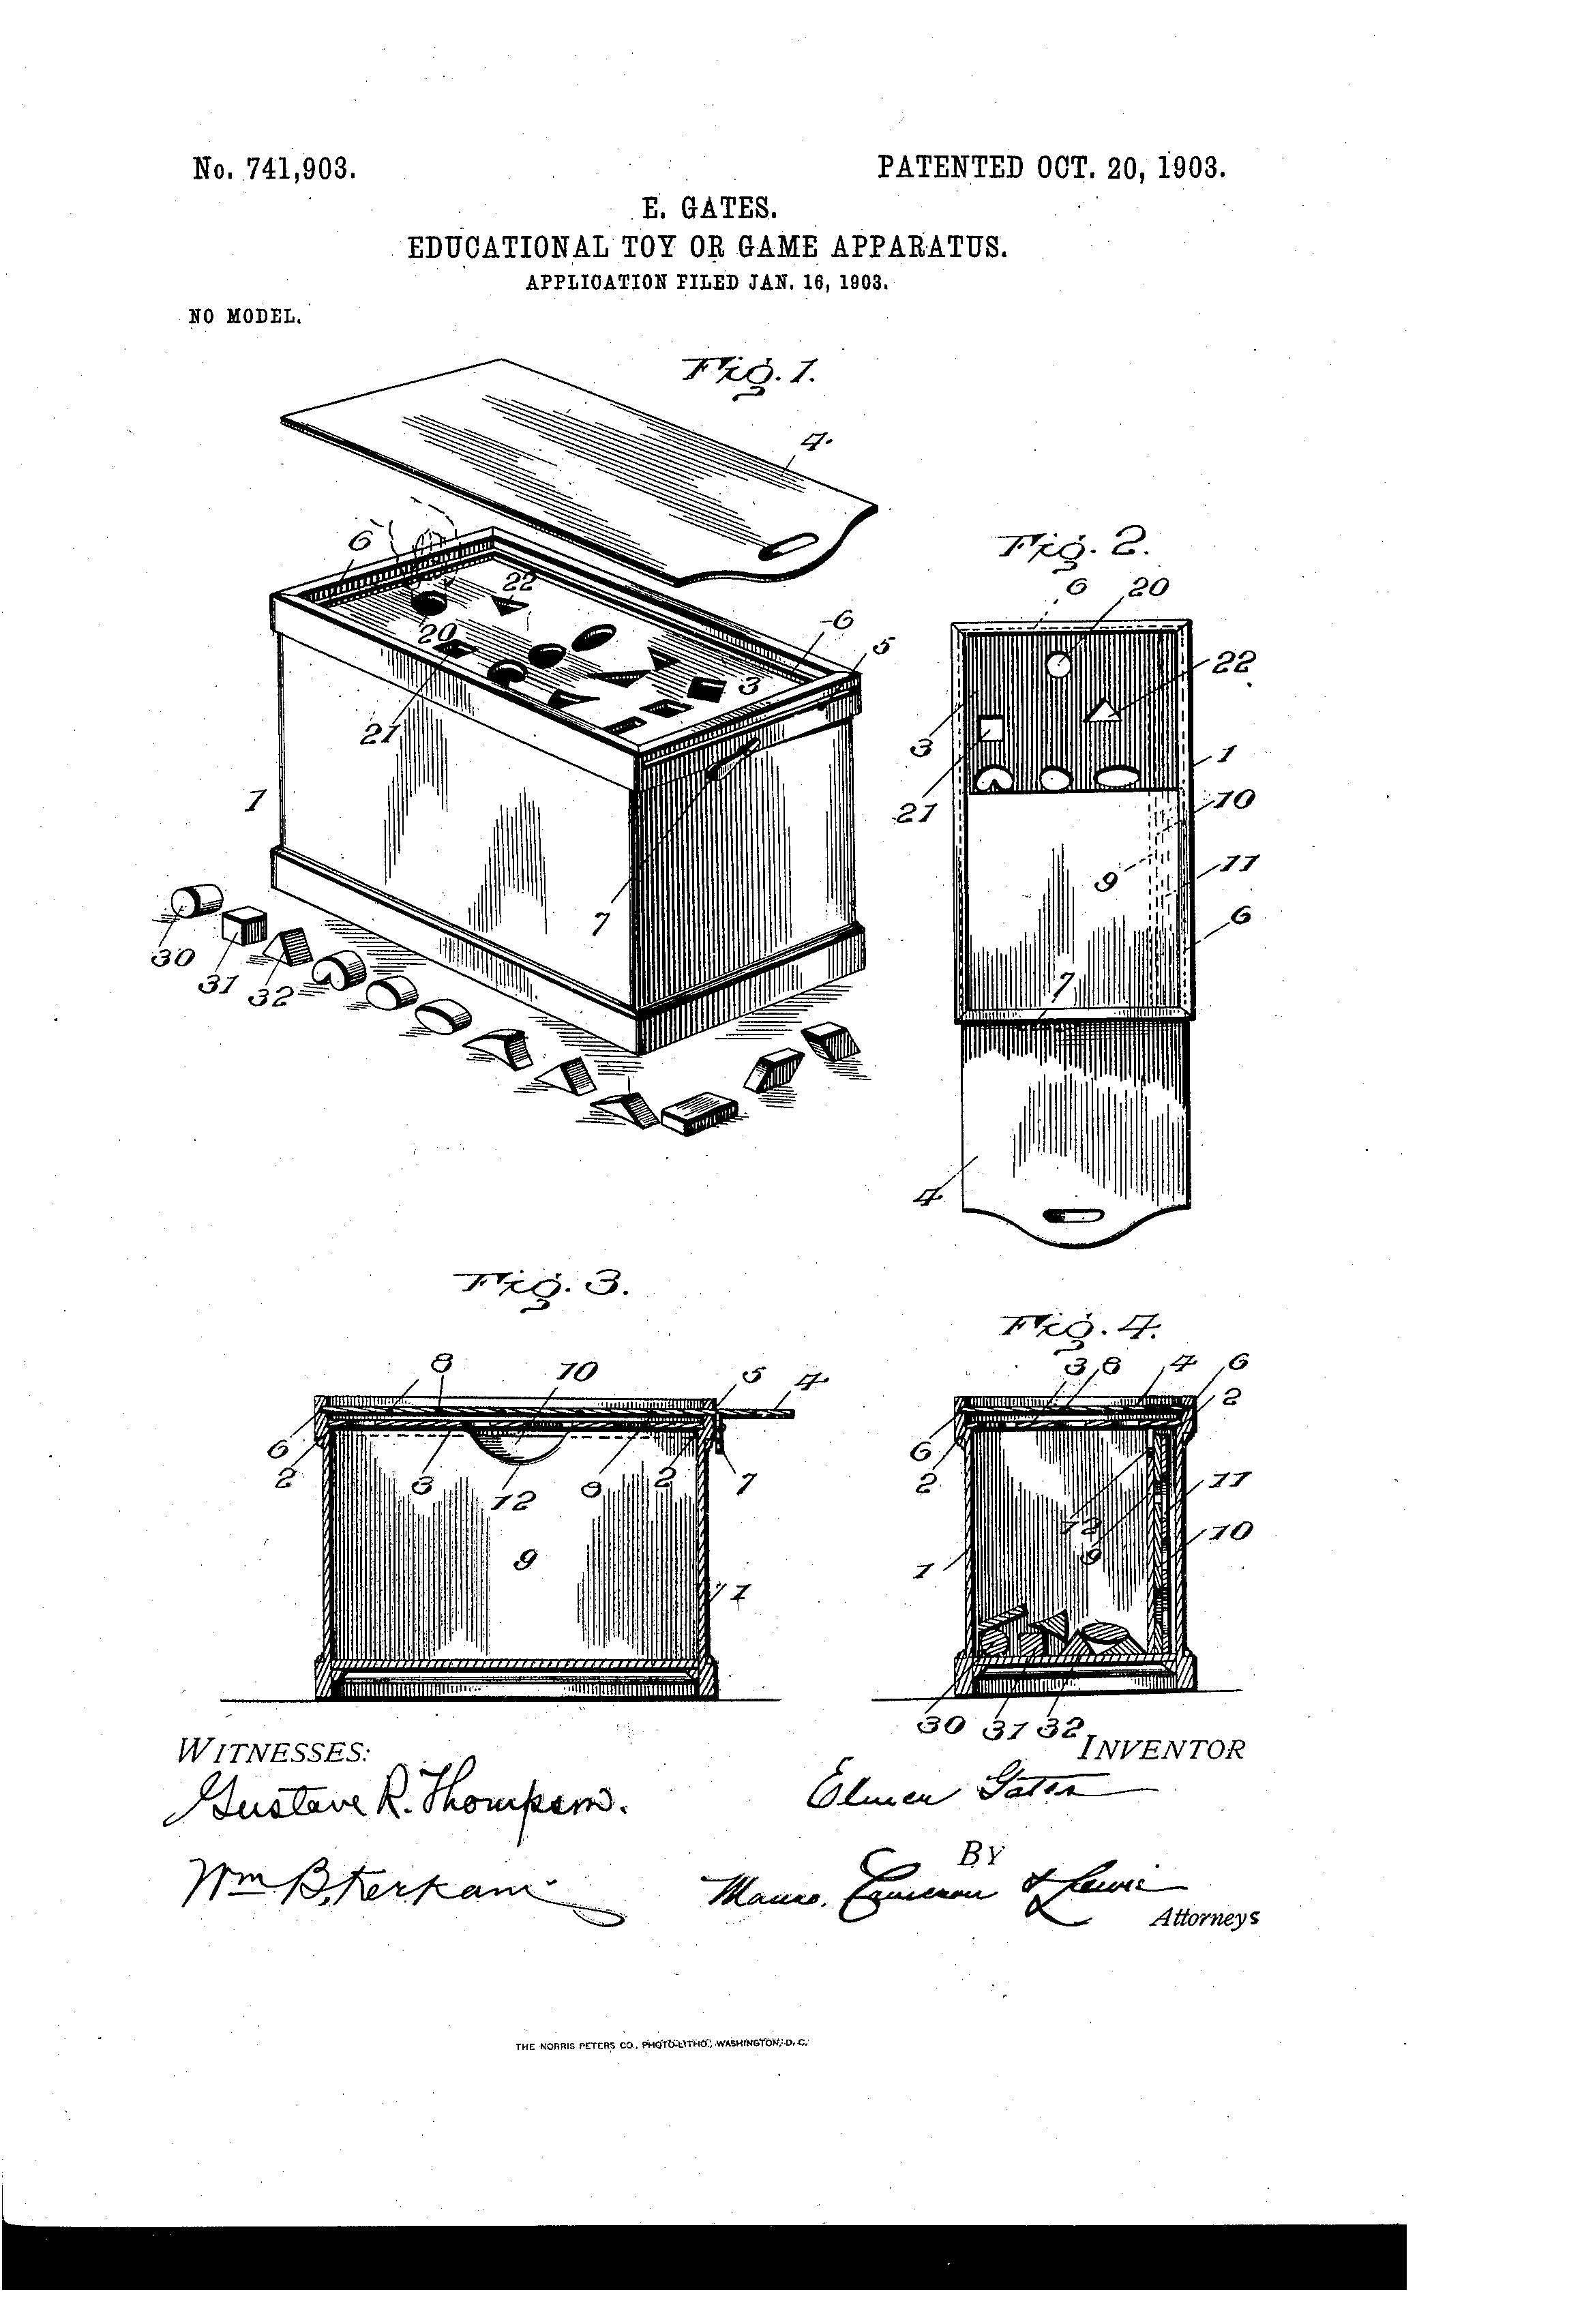 Patent drawing (US patent 741,903), educational toy or game apparatus, October 20, 1903.